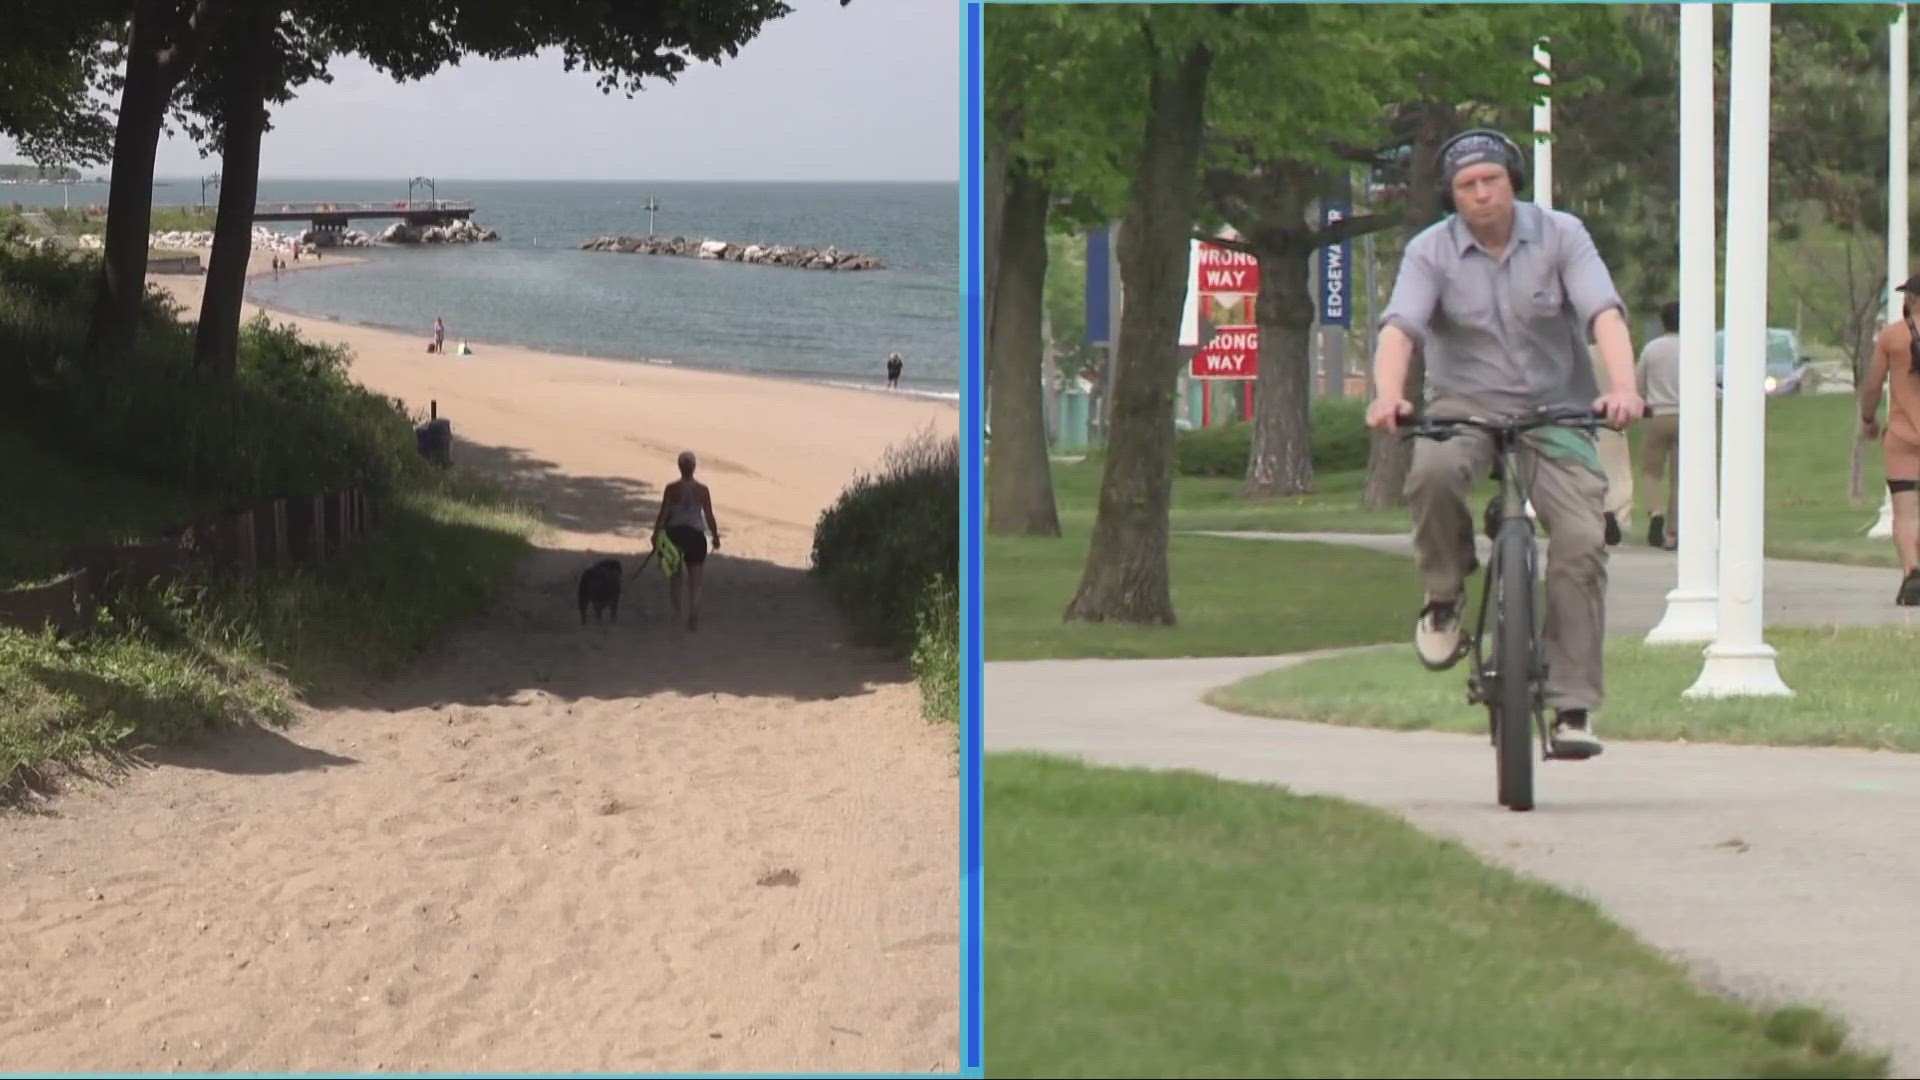 The connector will expand public lakefront access from the Metroparks Euclid Creek Reservation west along Beulah Park, Villa Beach and some of Shore Acres.